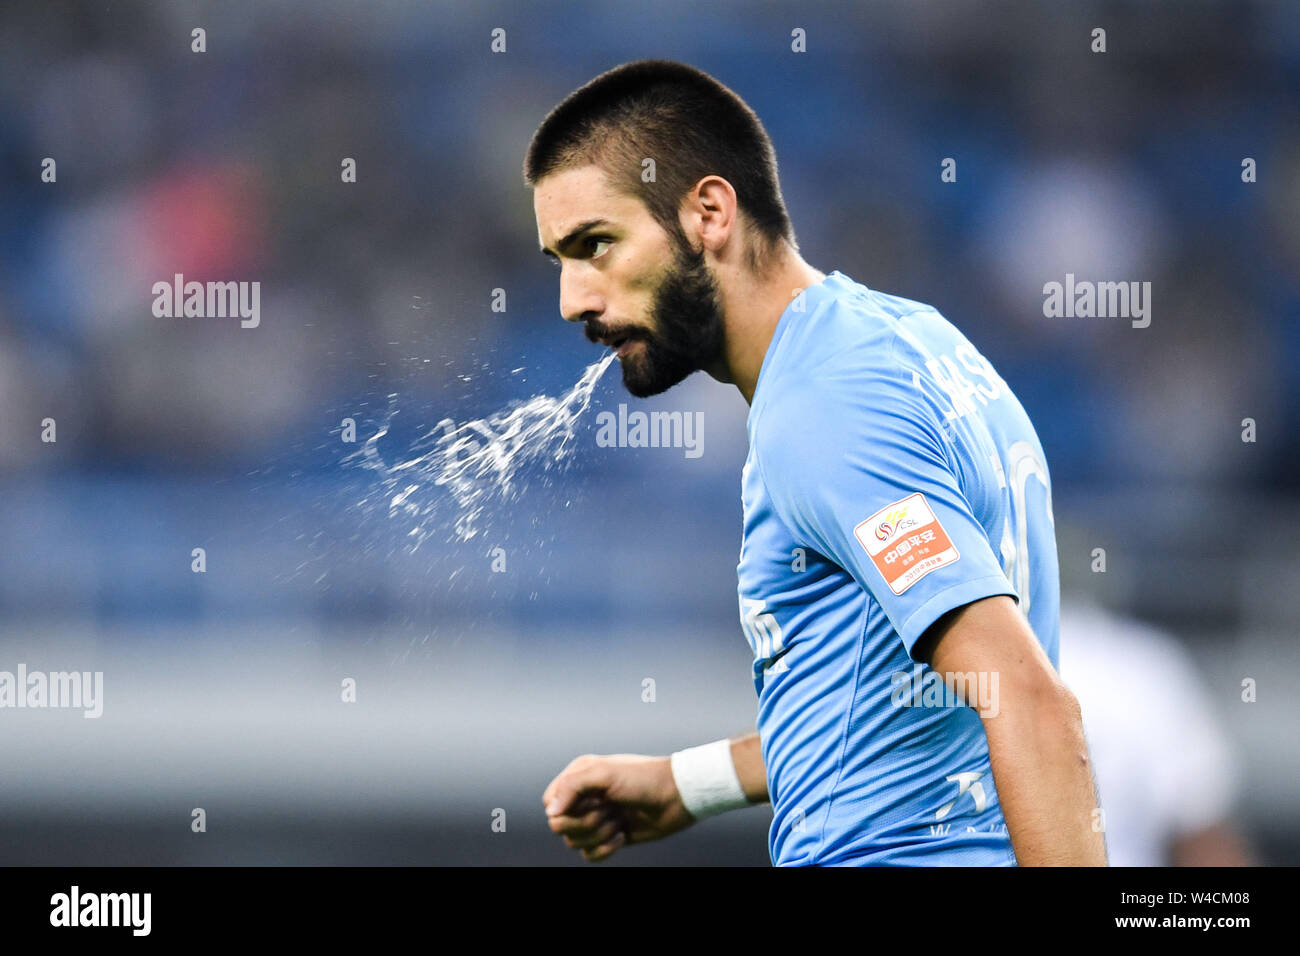 Belgian football player Yannick Ferreira Carrasco of Dalian Yifang F.C. at the 19th round of Chinese Football Association Super League (CSL) against Tianjin TEDA in Tianjin, China, 20 July 2019. The match ended with a tie 3-3. Stock Photo